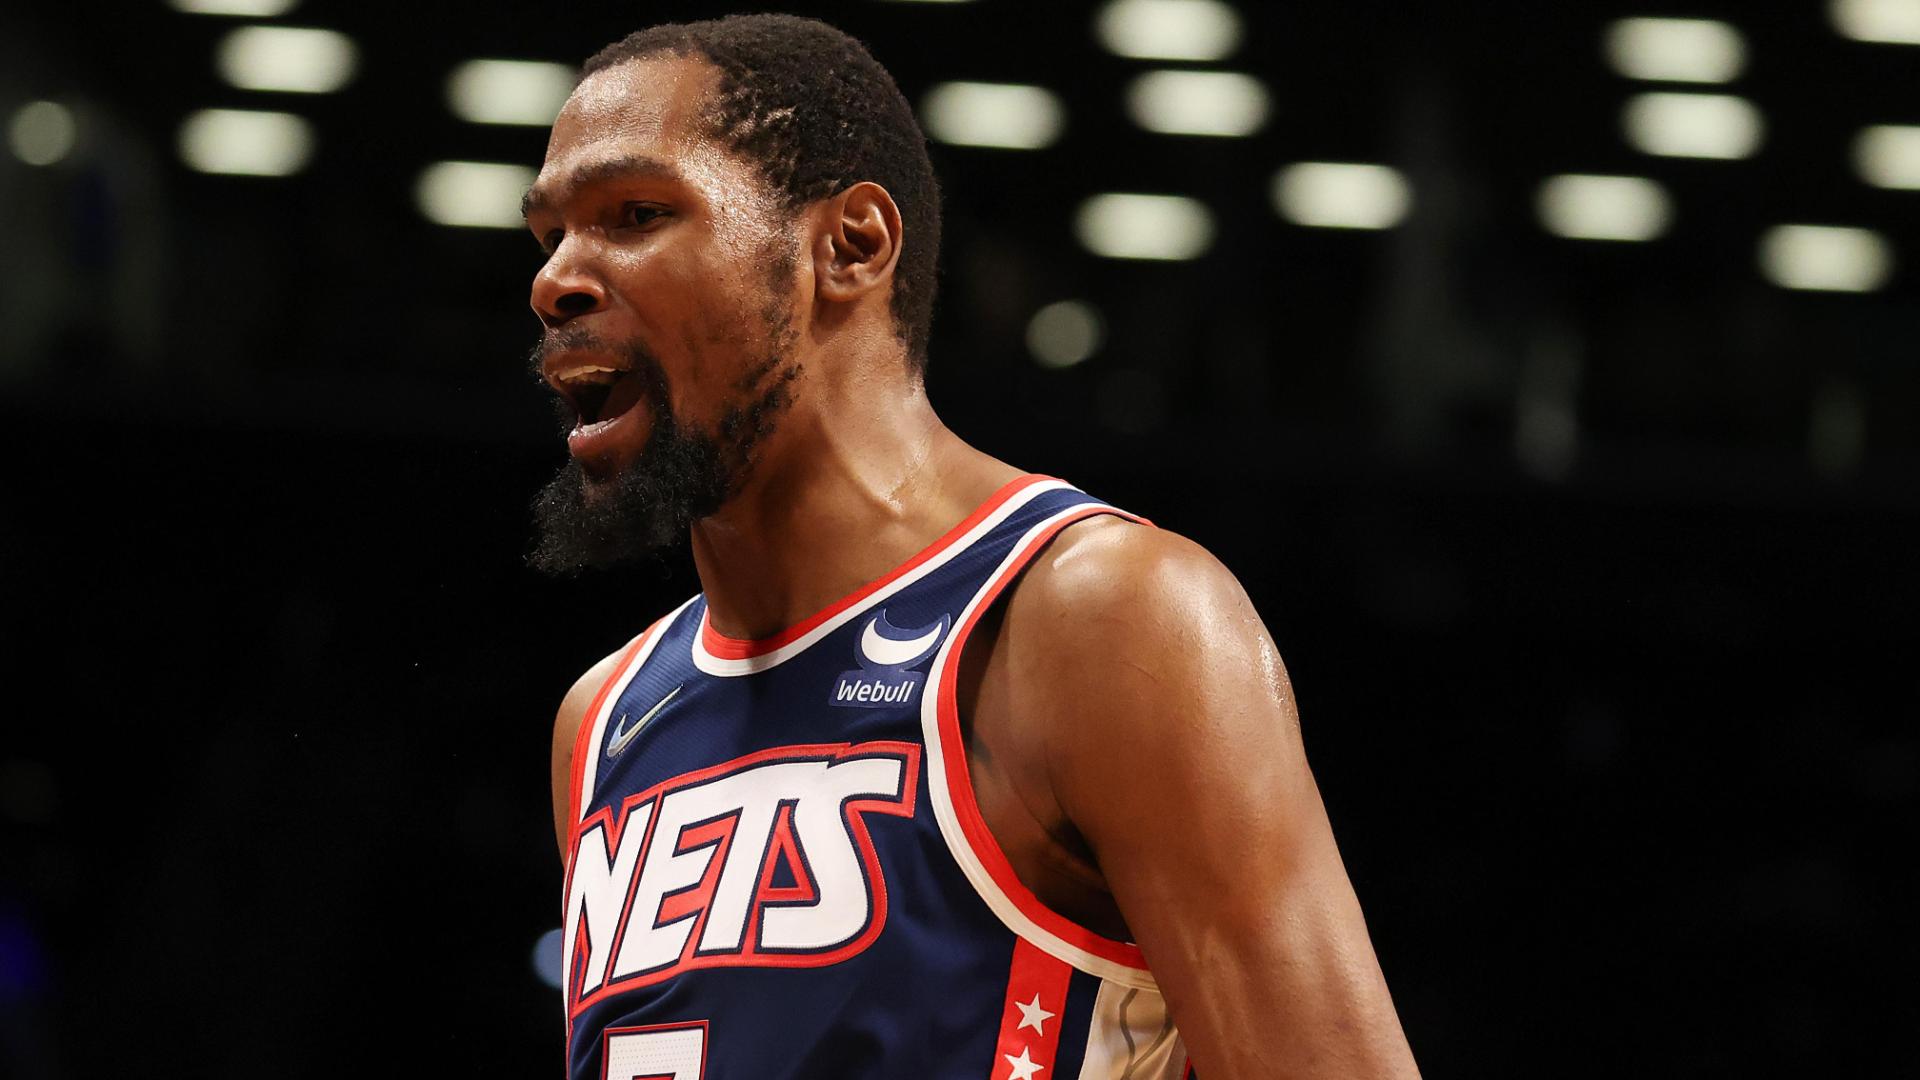 Kevin Durant drops 34 in win vs. 76ers